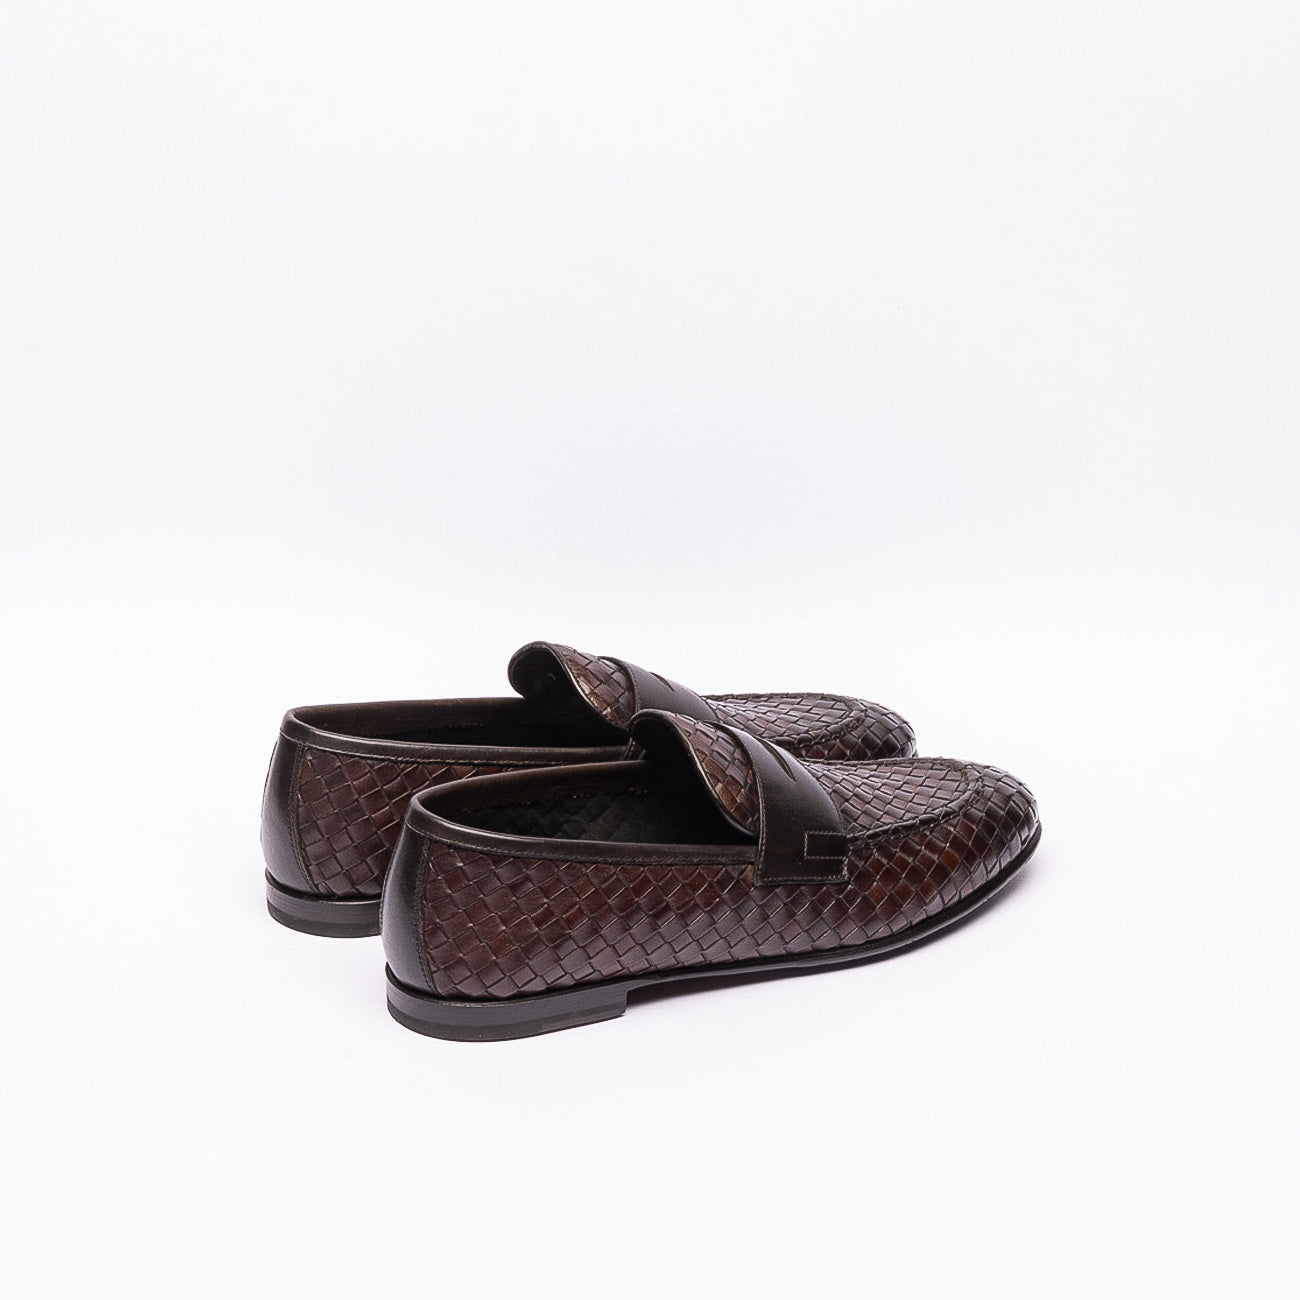 Barrett 231u040.1 penny loafer in brown woven leather